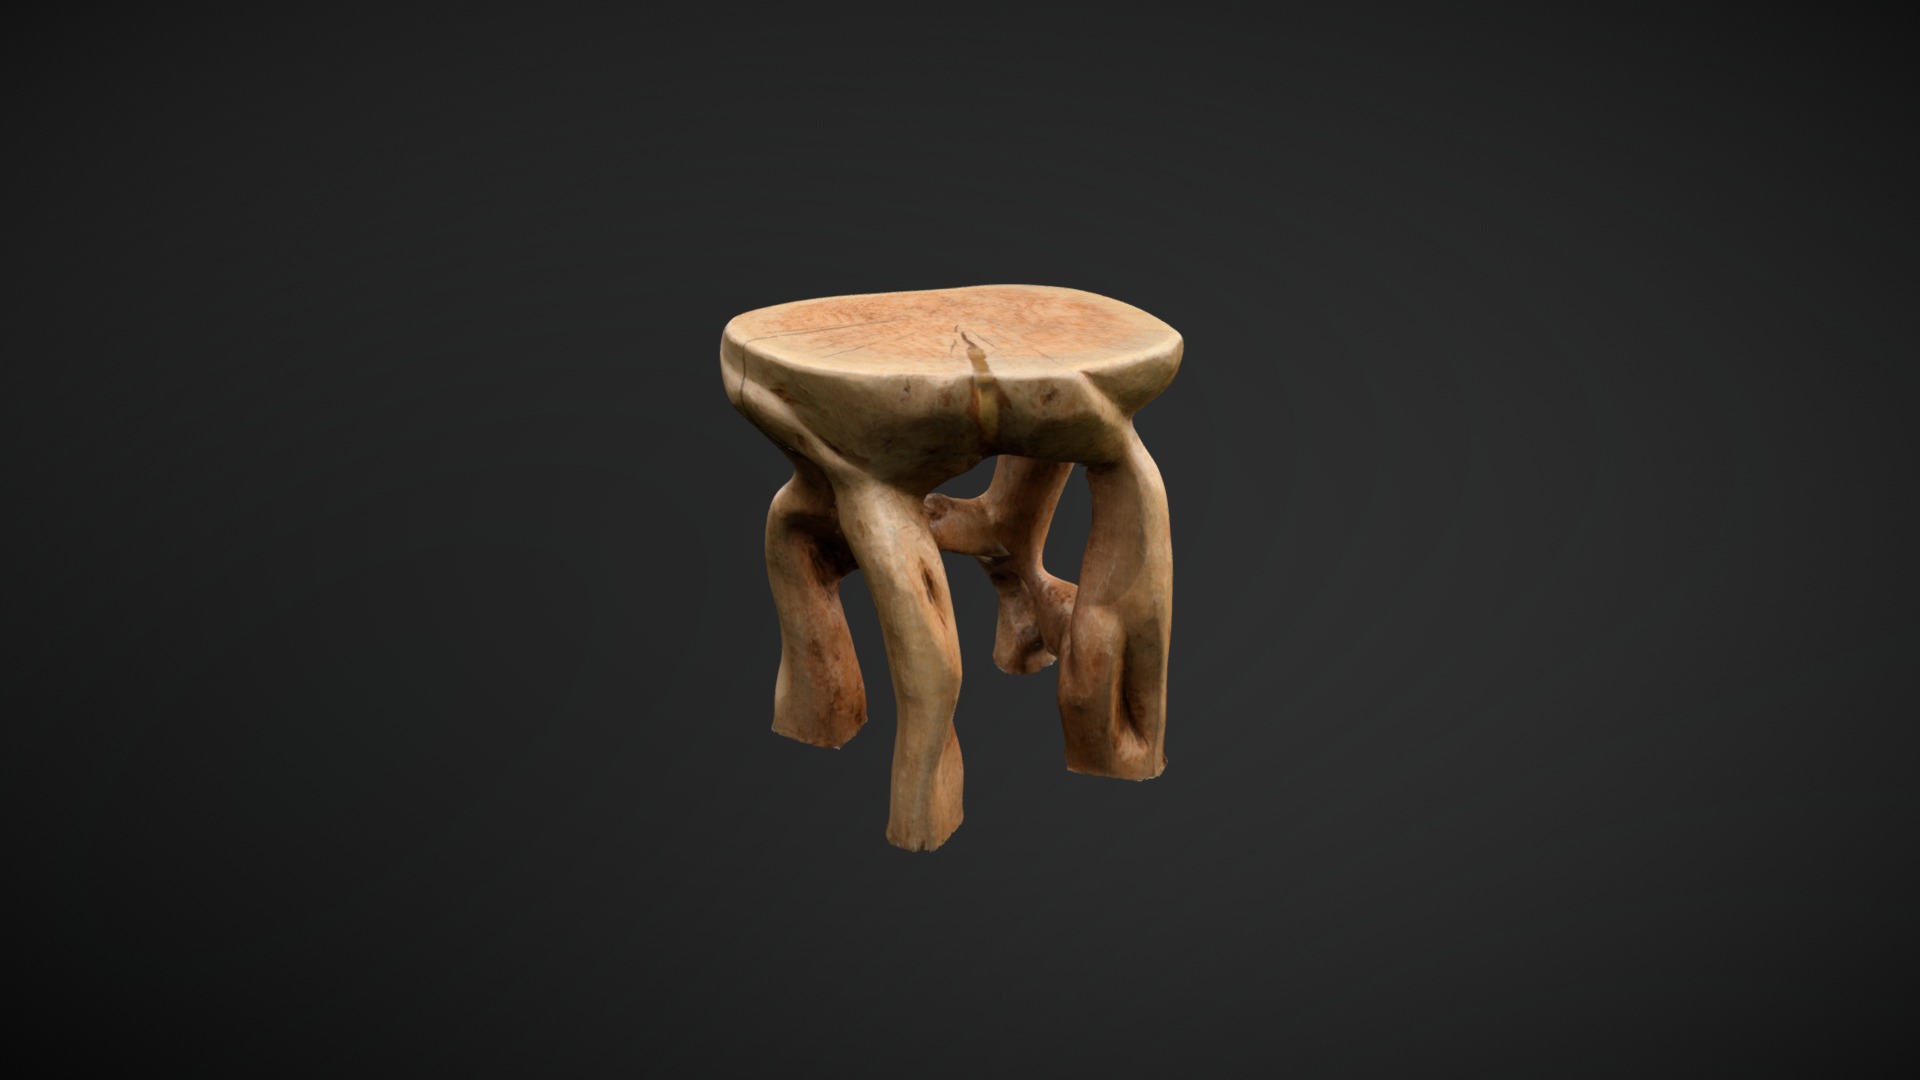 3D model Unique wooden tabouret chair - This is a 3D model of the Unique wooden tabouret chair. The 3D model is about a mushroom on a black background.